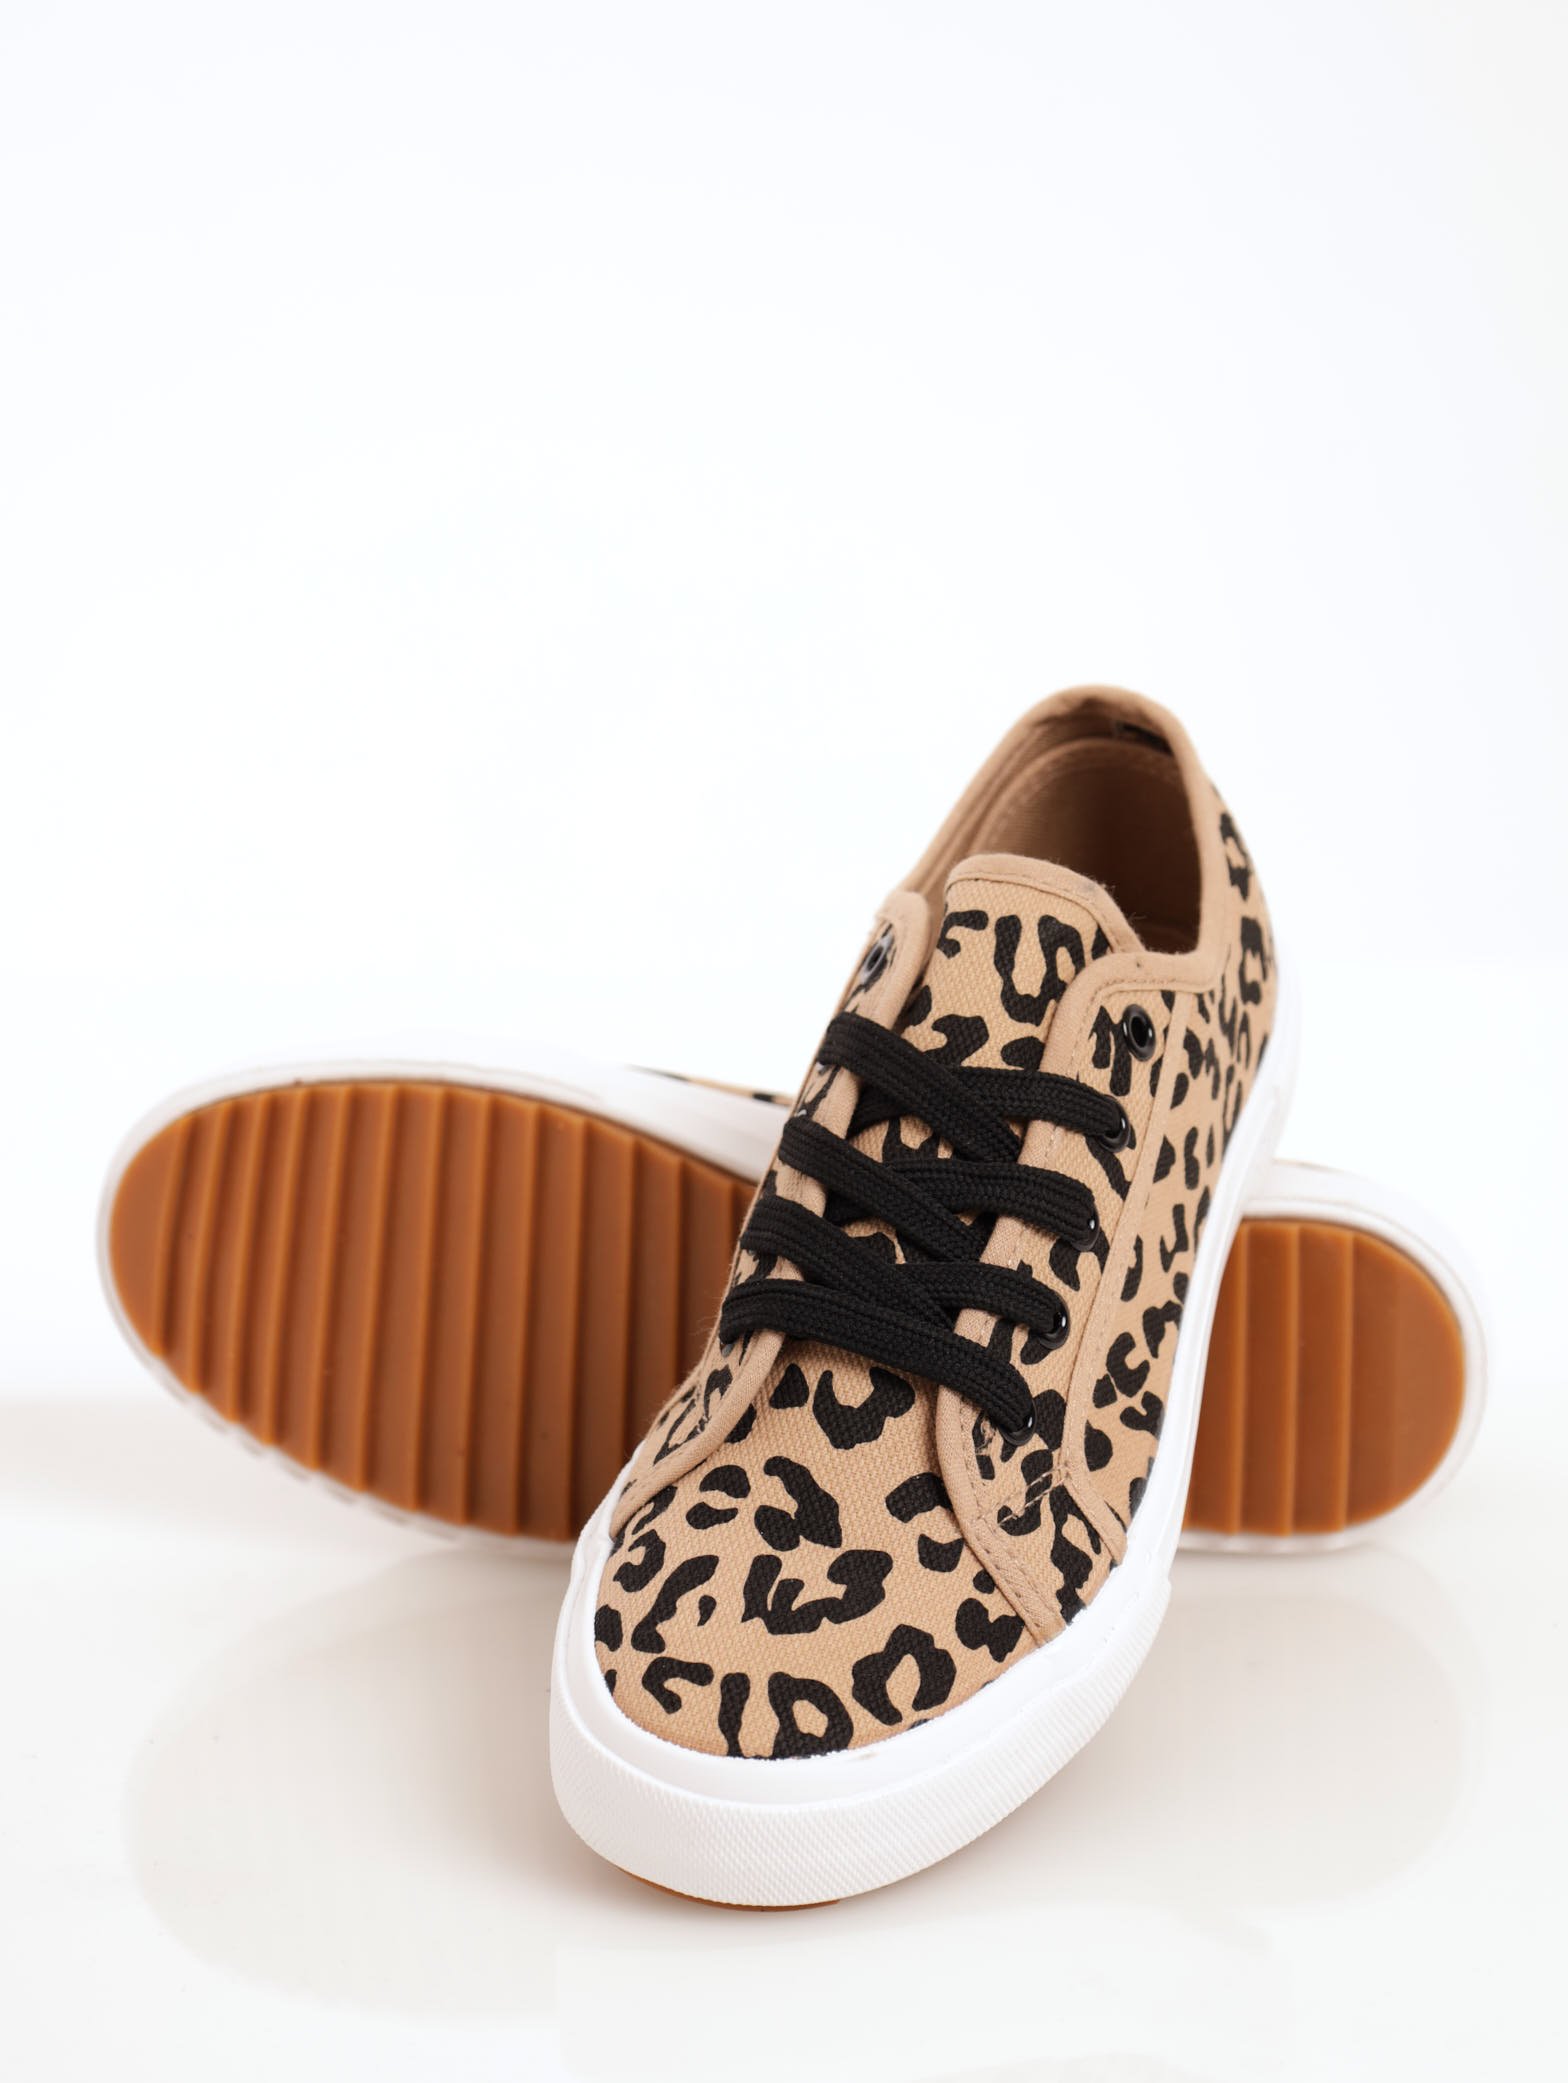 Guess Animal Print Sneakers Womens 8.5 Leopard Low Top Athletic Shoe | Print  sneakers, Sneakers, Shoes